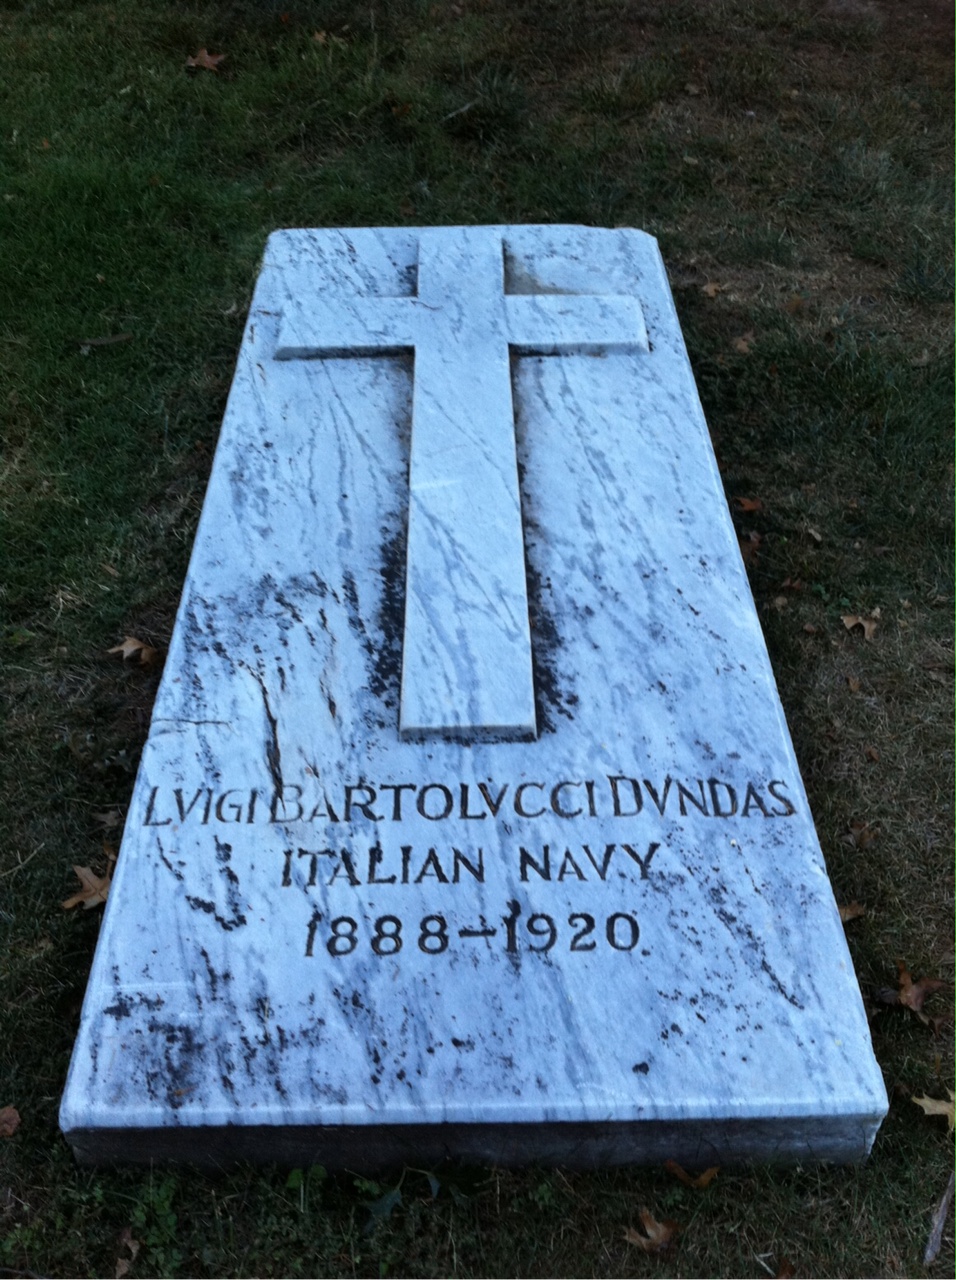 Headstone of Luigi Bartolucci-Dundas of the Italian Navy, one of the foreign nationals buried at Arlington National Cemetery